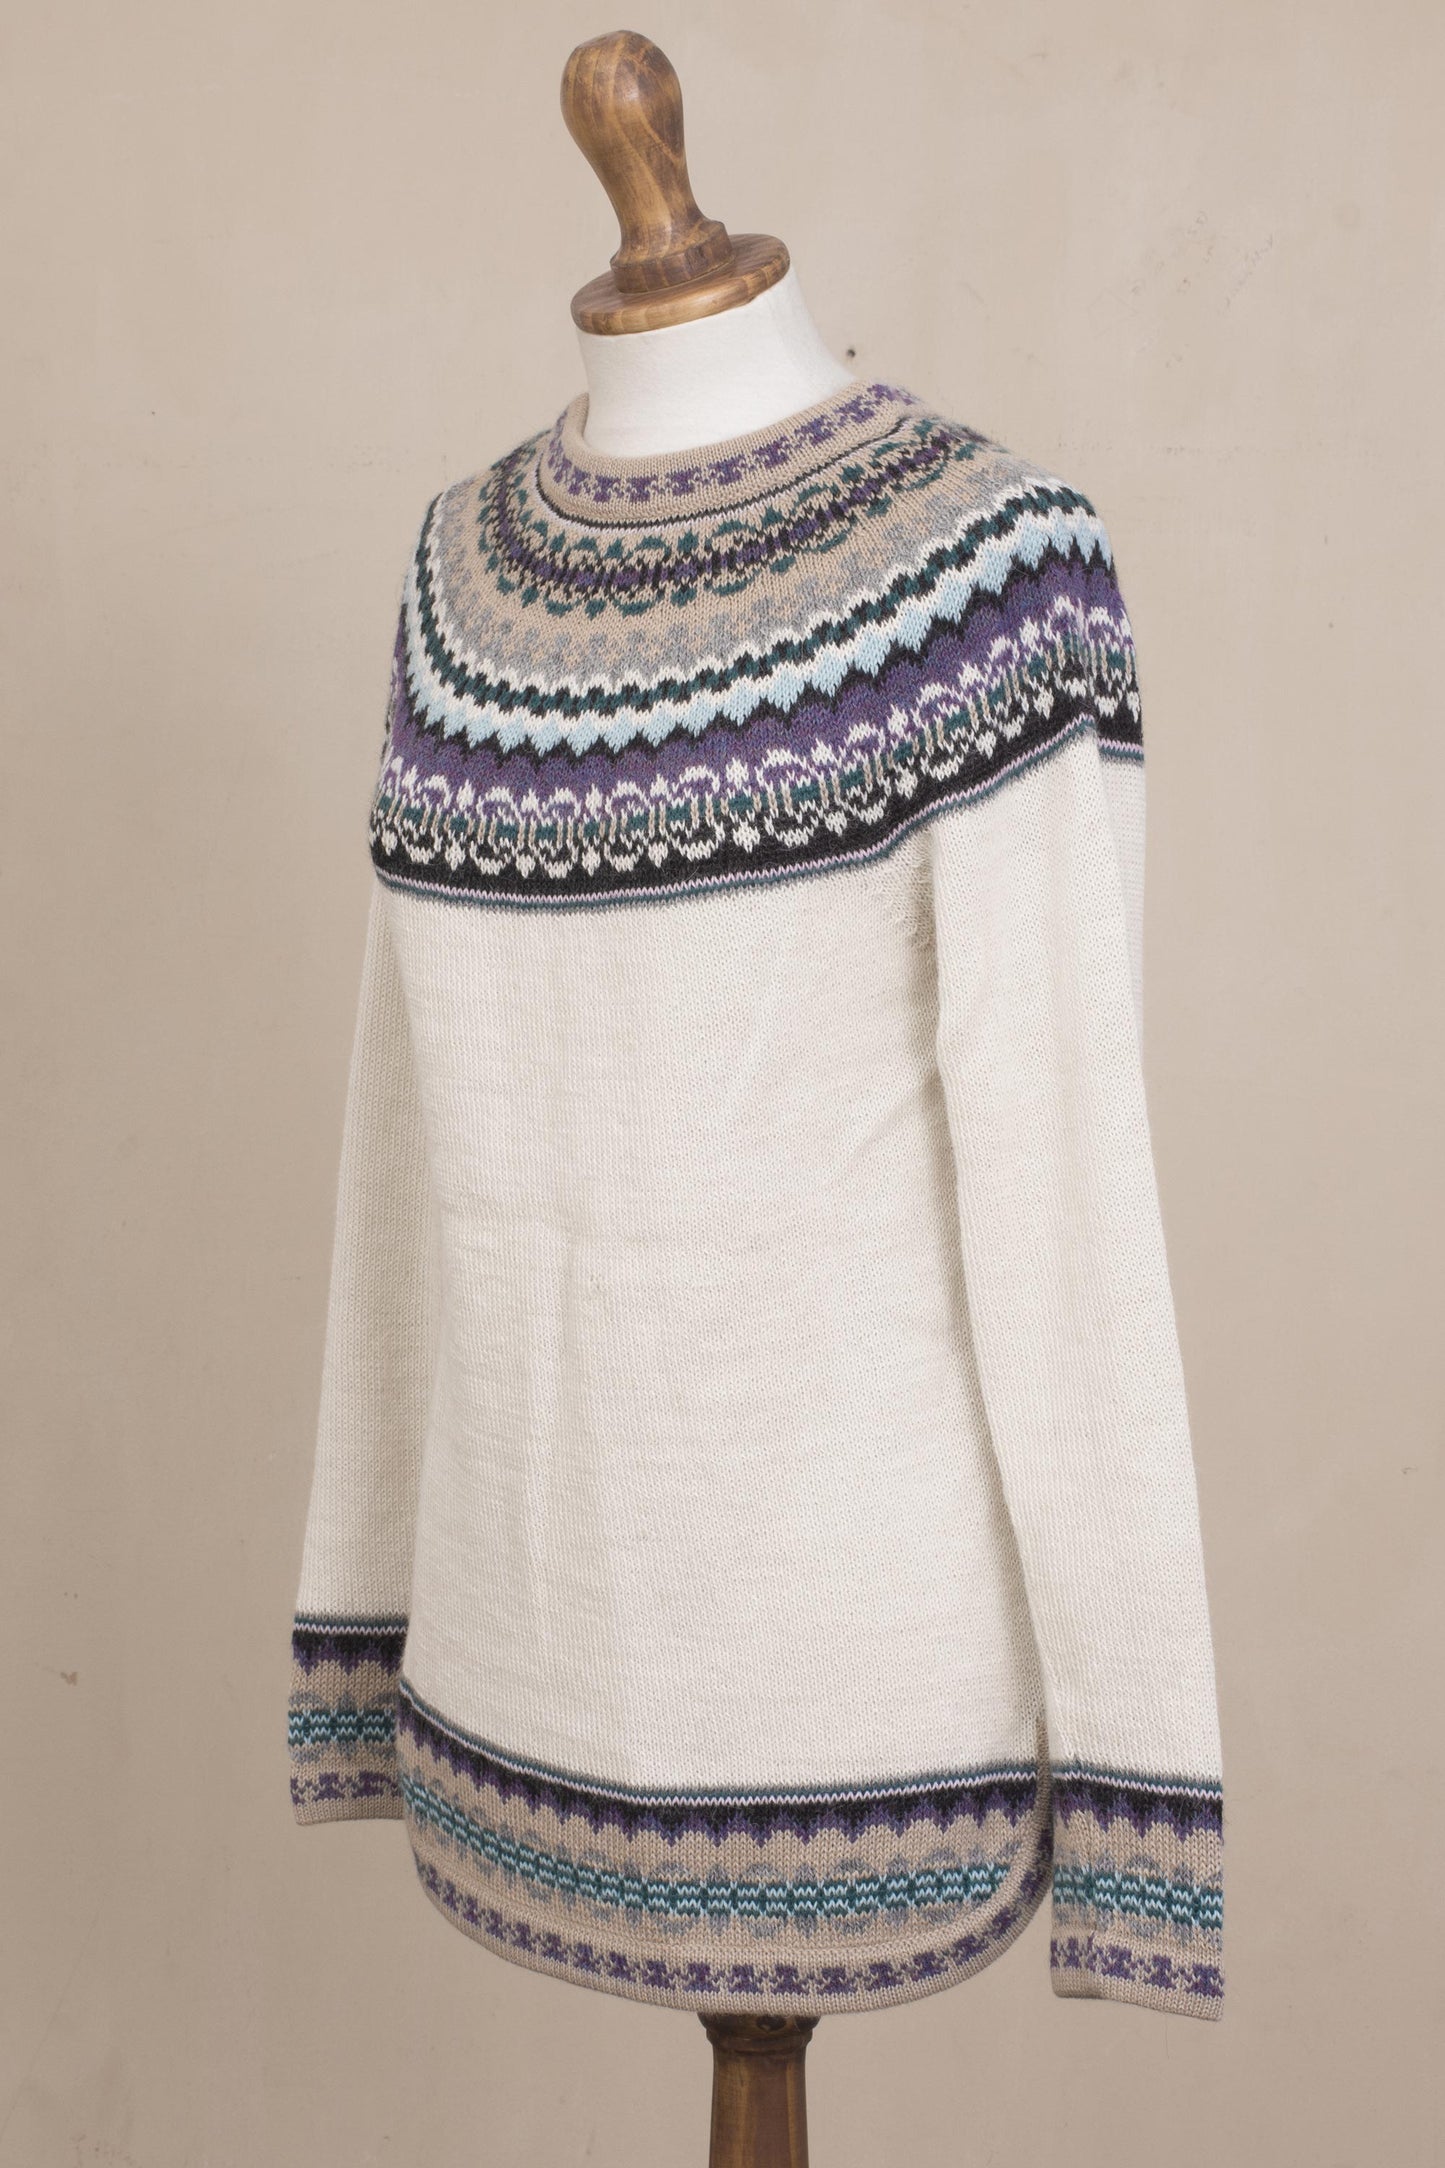 Playful Ivory Knit 100% Alpaca Pullover Sweater in Antique White from Peru